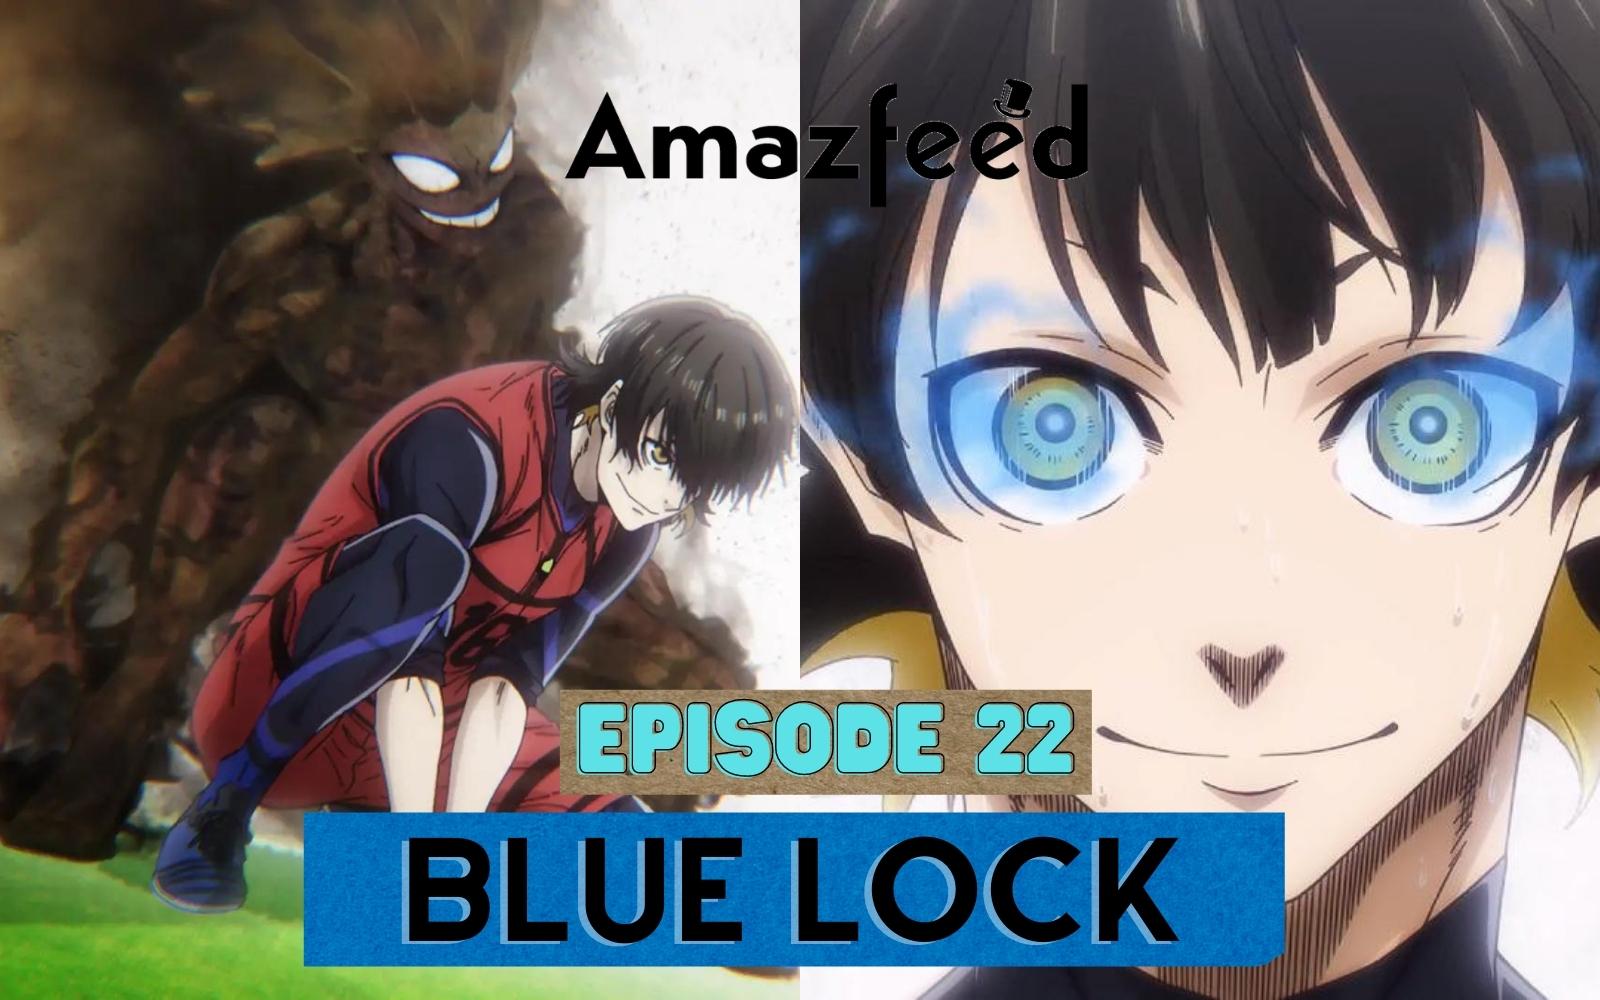 Blue Lock Episode 22: Release Date, Preview & Where To Watch - OtakuKart